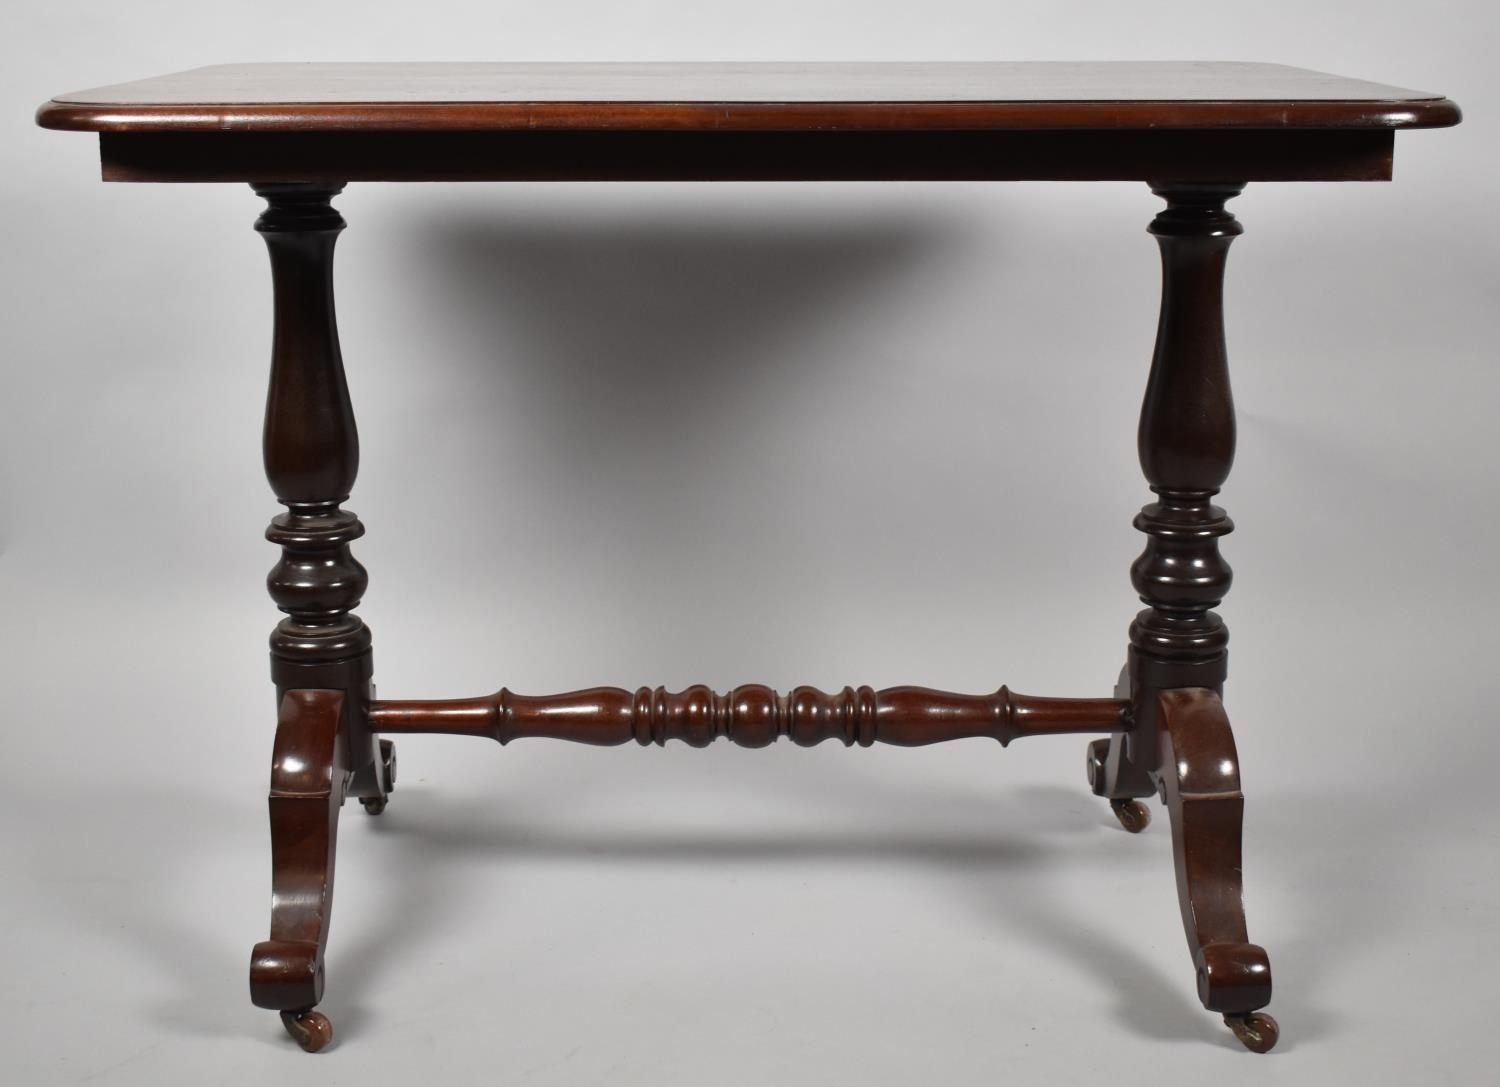 A Victorian Mahogany Rectangular Centre Table with turned Supports and Scrolled Feet. 107x66x79